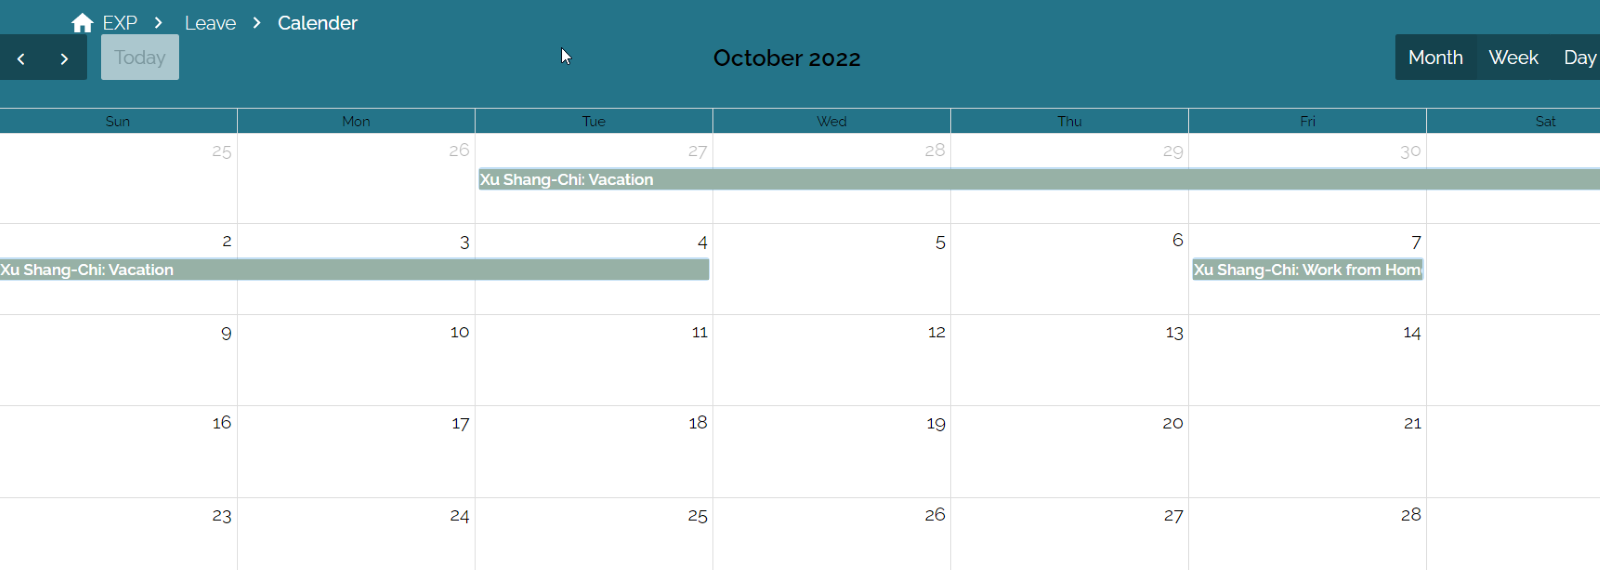 The user's Vacation and Work from Home policies are displayed in the Leave Calendar.